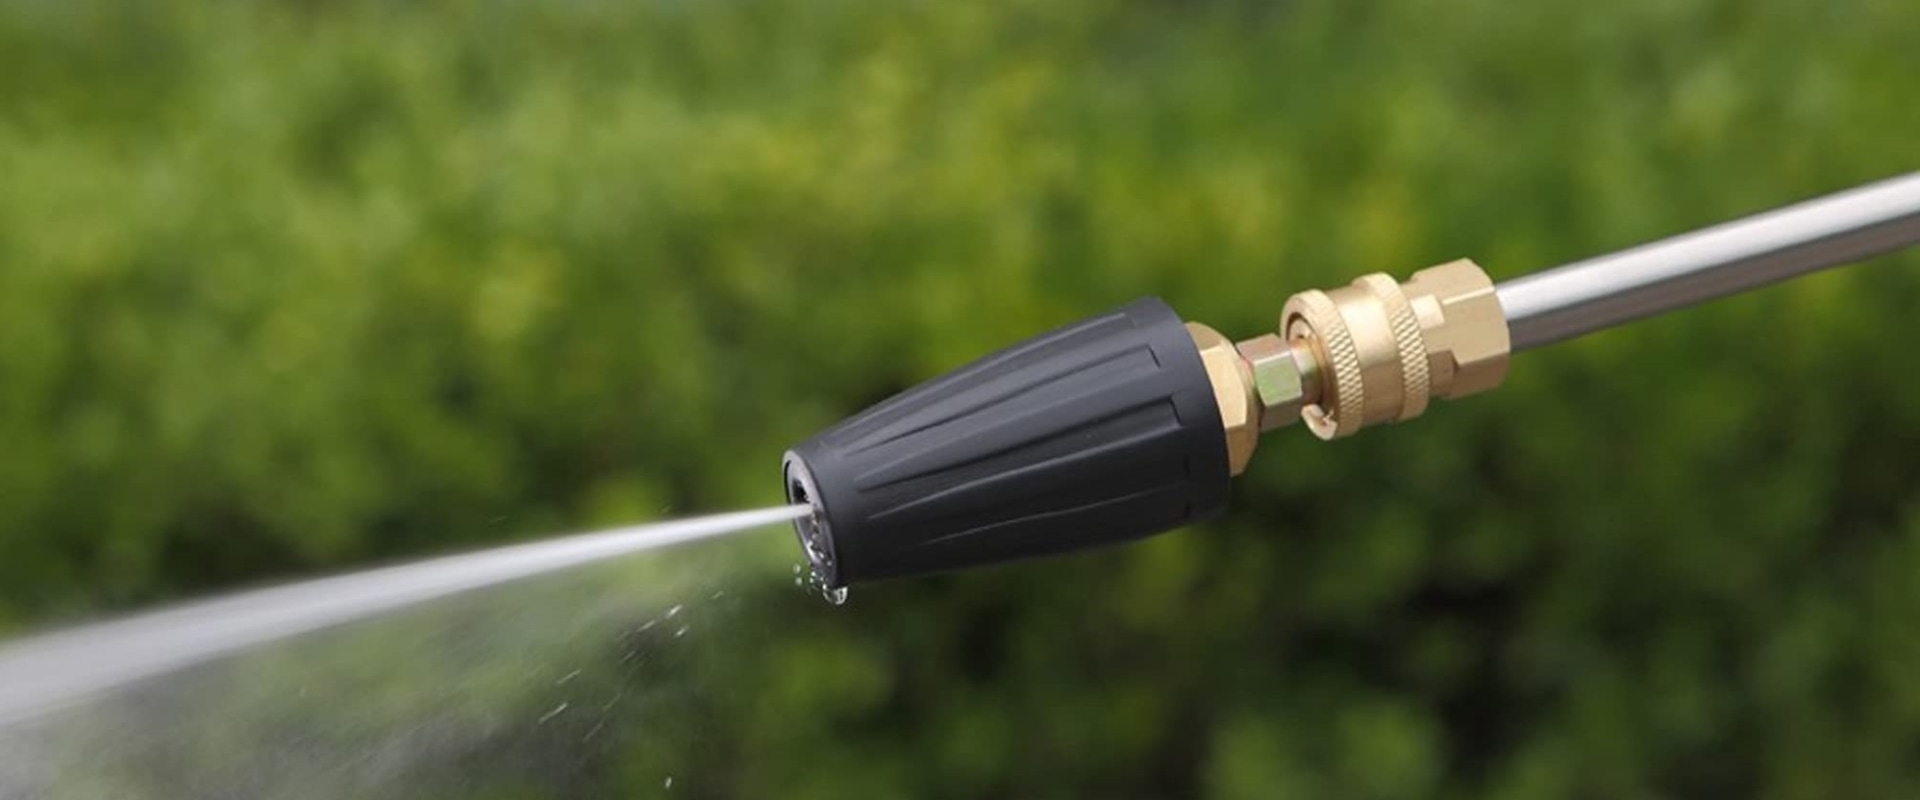 Are there any special considerations when using a turbo-nozzle powered pressure washer?